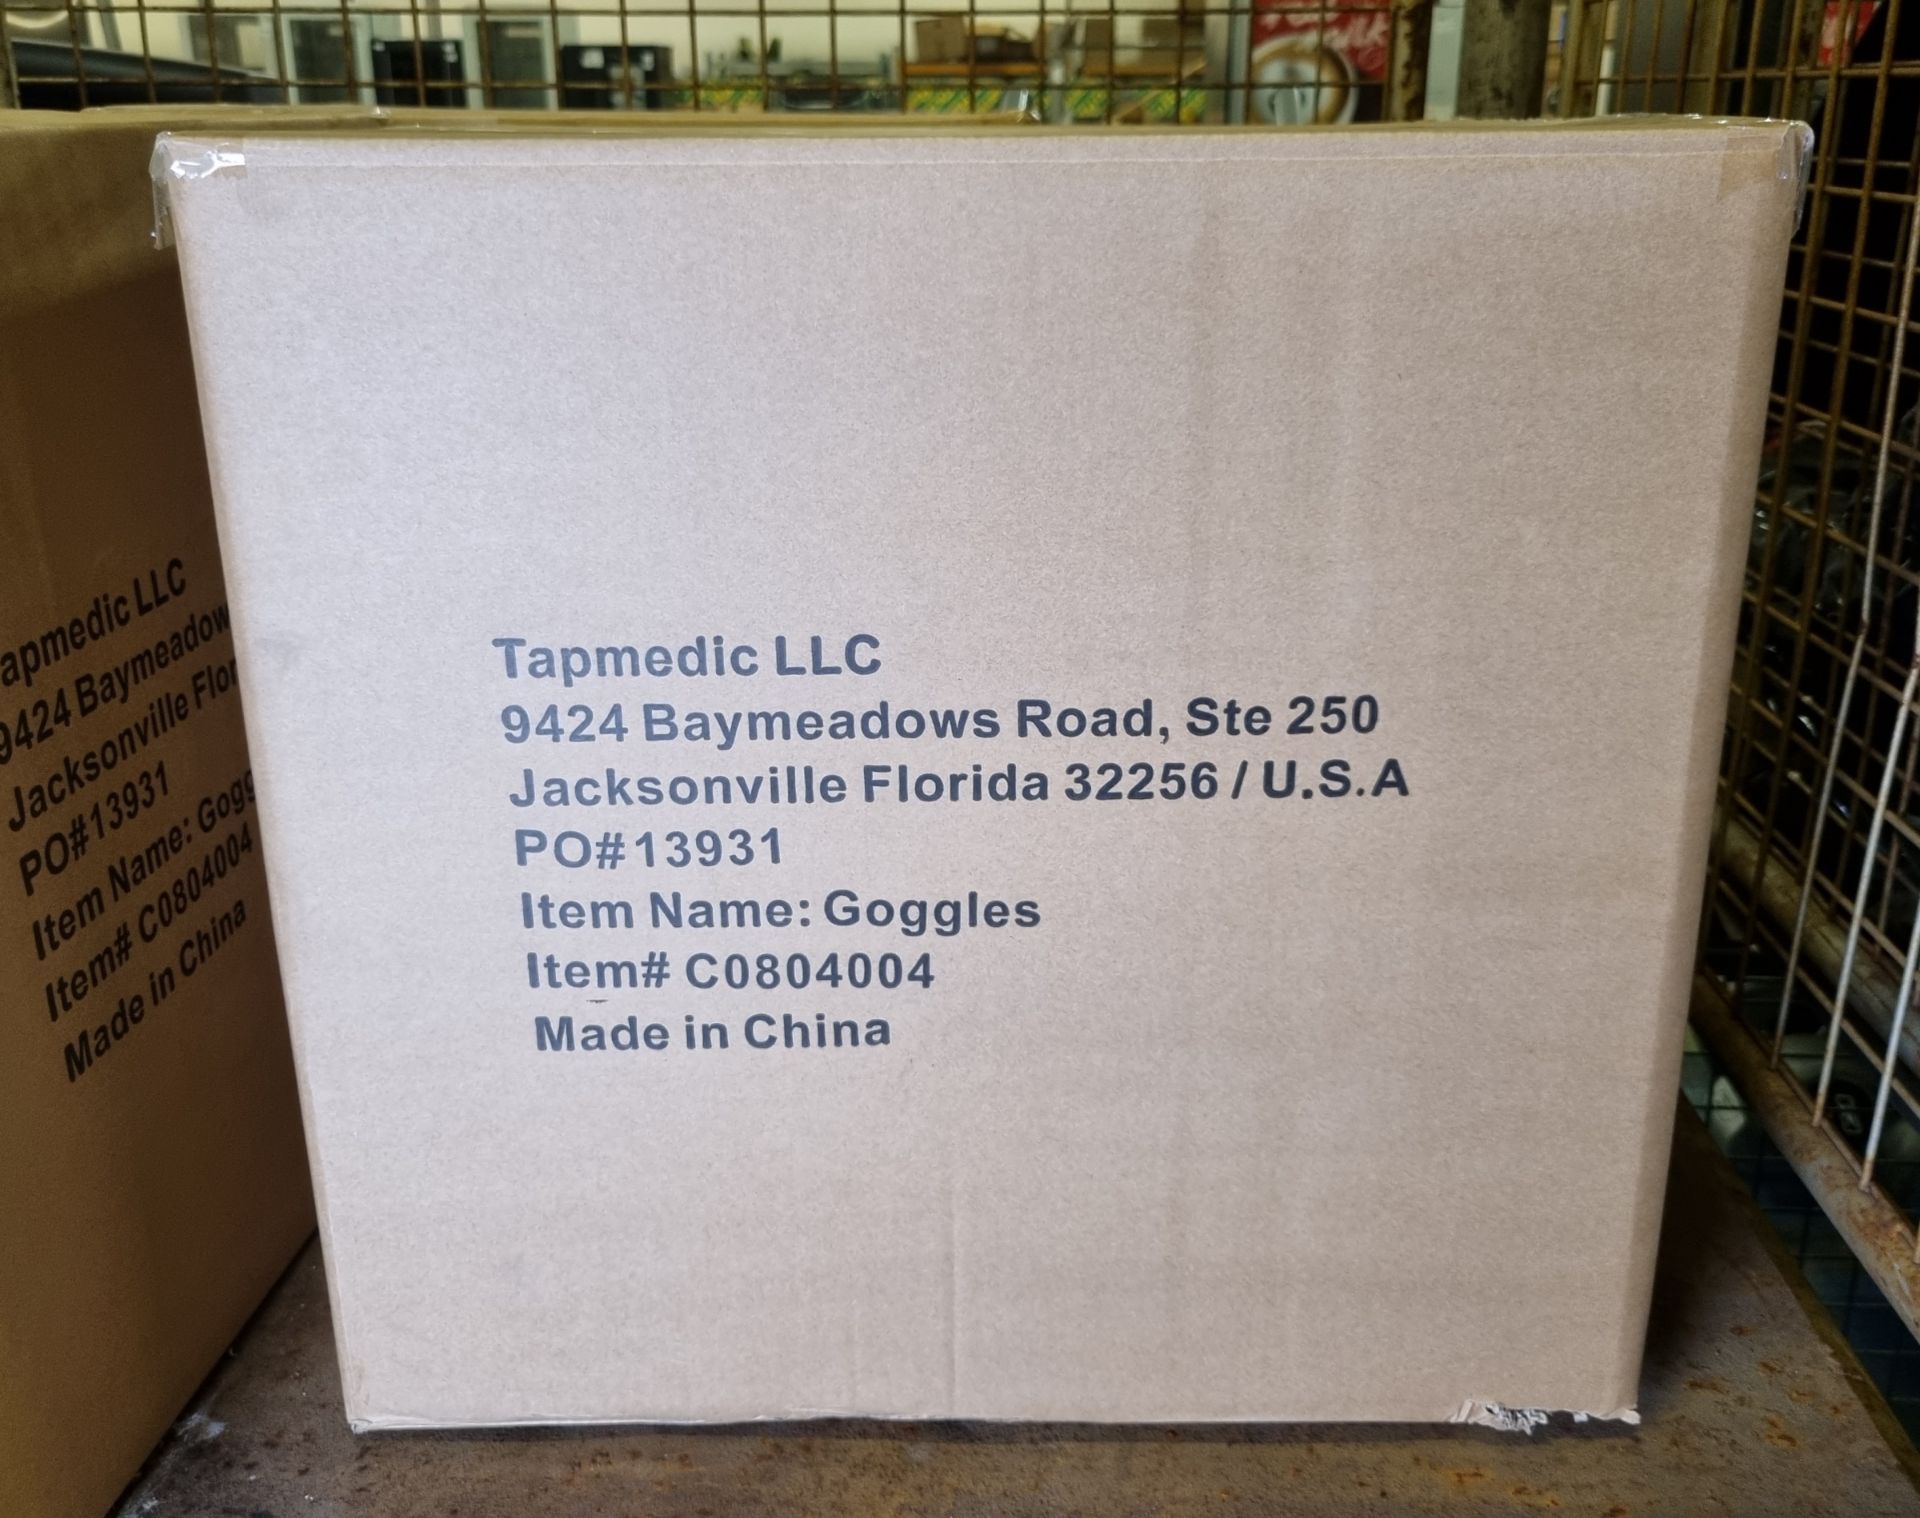 3x boxes of Tapmedic LLC safety goggles - 150 pairs per box - Image 2 of 5